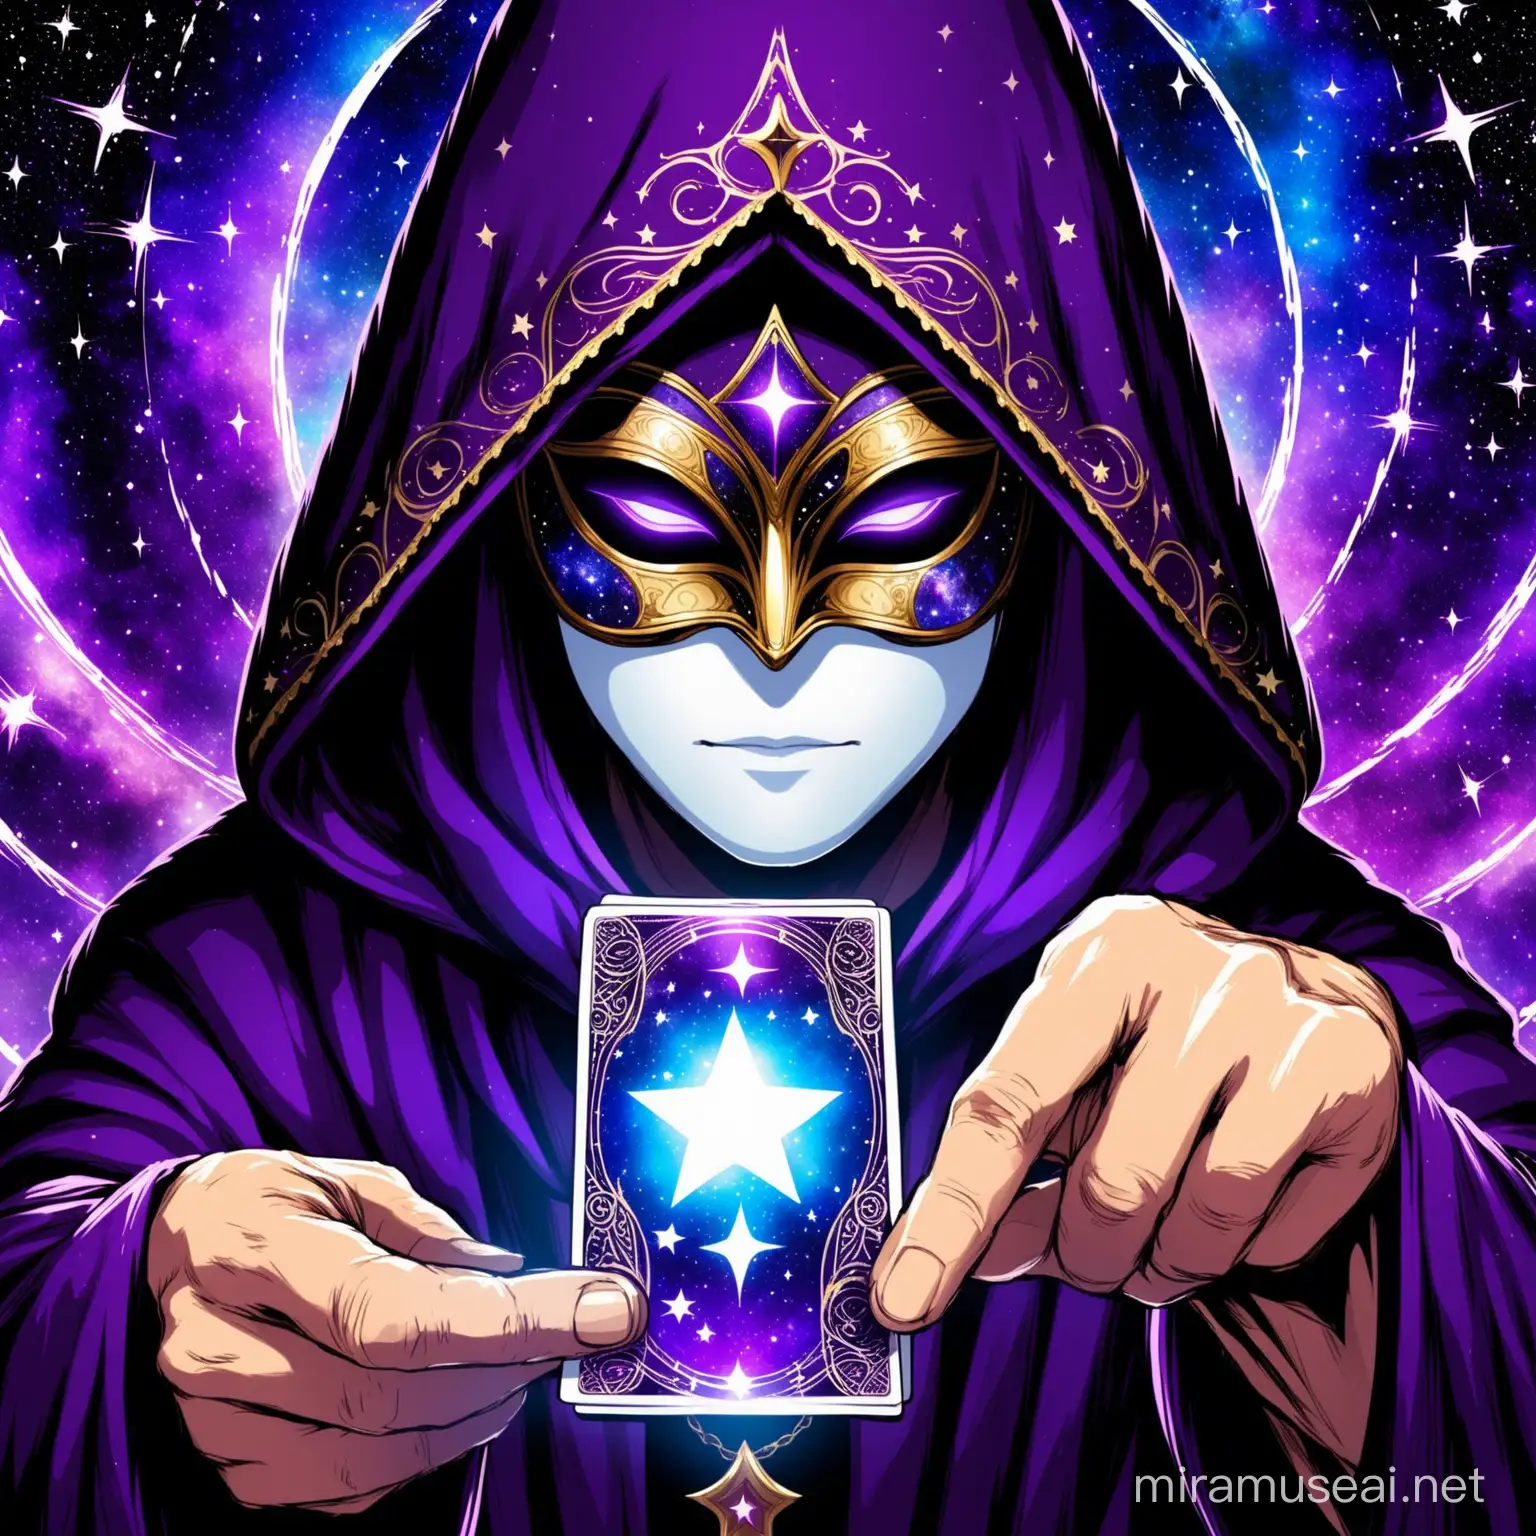 a fantasy fortune teller with hidden face under a galaxy violet hood, he is handling a tarot card. two starry white eyes can be seen from under the hood, the fortune teller has a galactic carnival mask